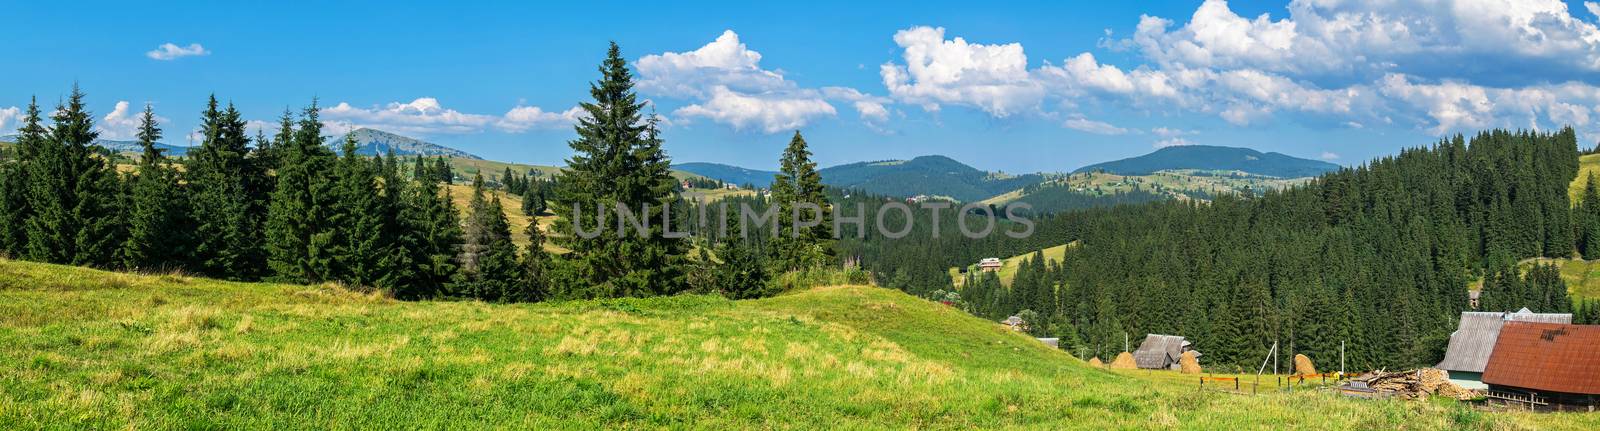 village houses on the slopes of mountains among meadows and spruce forests under a blue cloudy sky. place of rest, tourism, travel by Adamchuk